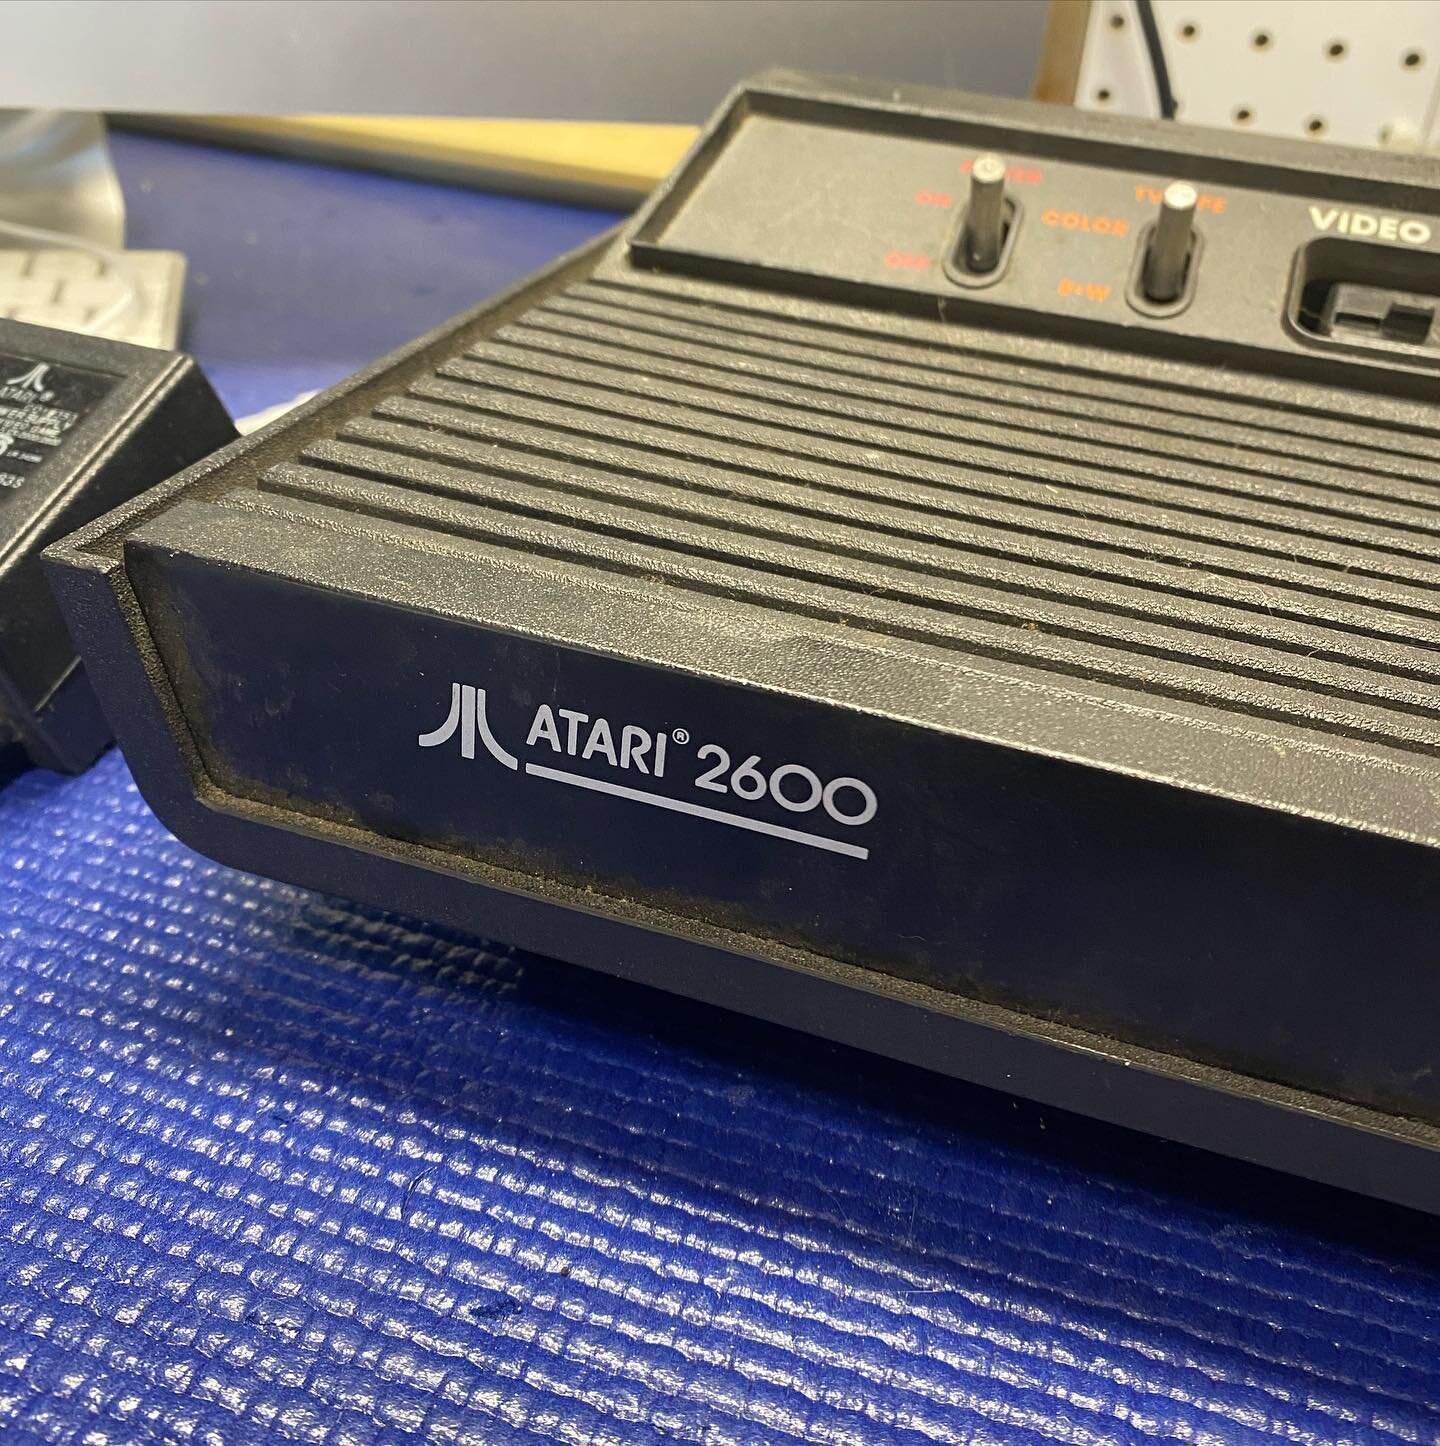 We posted a picture of this very dirty Atari 2600 (1982 so called #DarthVader edition) a few weeks ago. Today, we took it apart, cleaned it, and got it working once again. The board inside is dated 1980 and is a part of a revision that moved the left